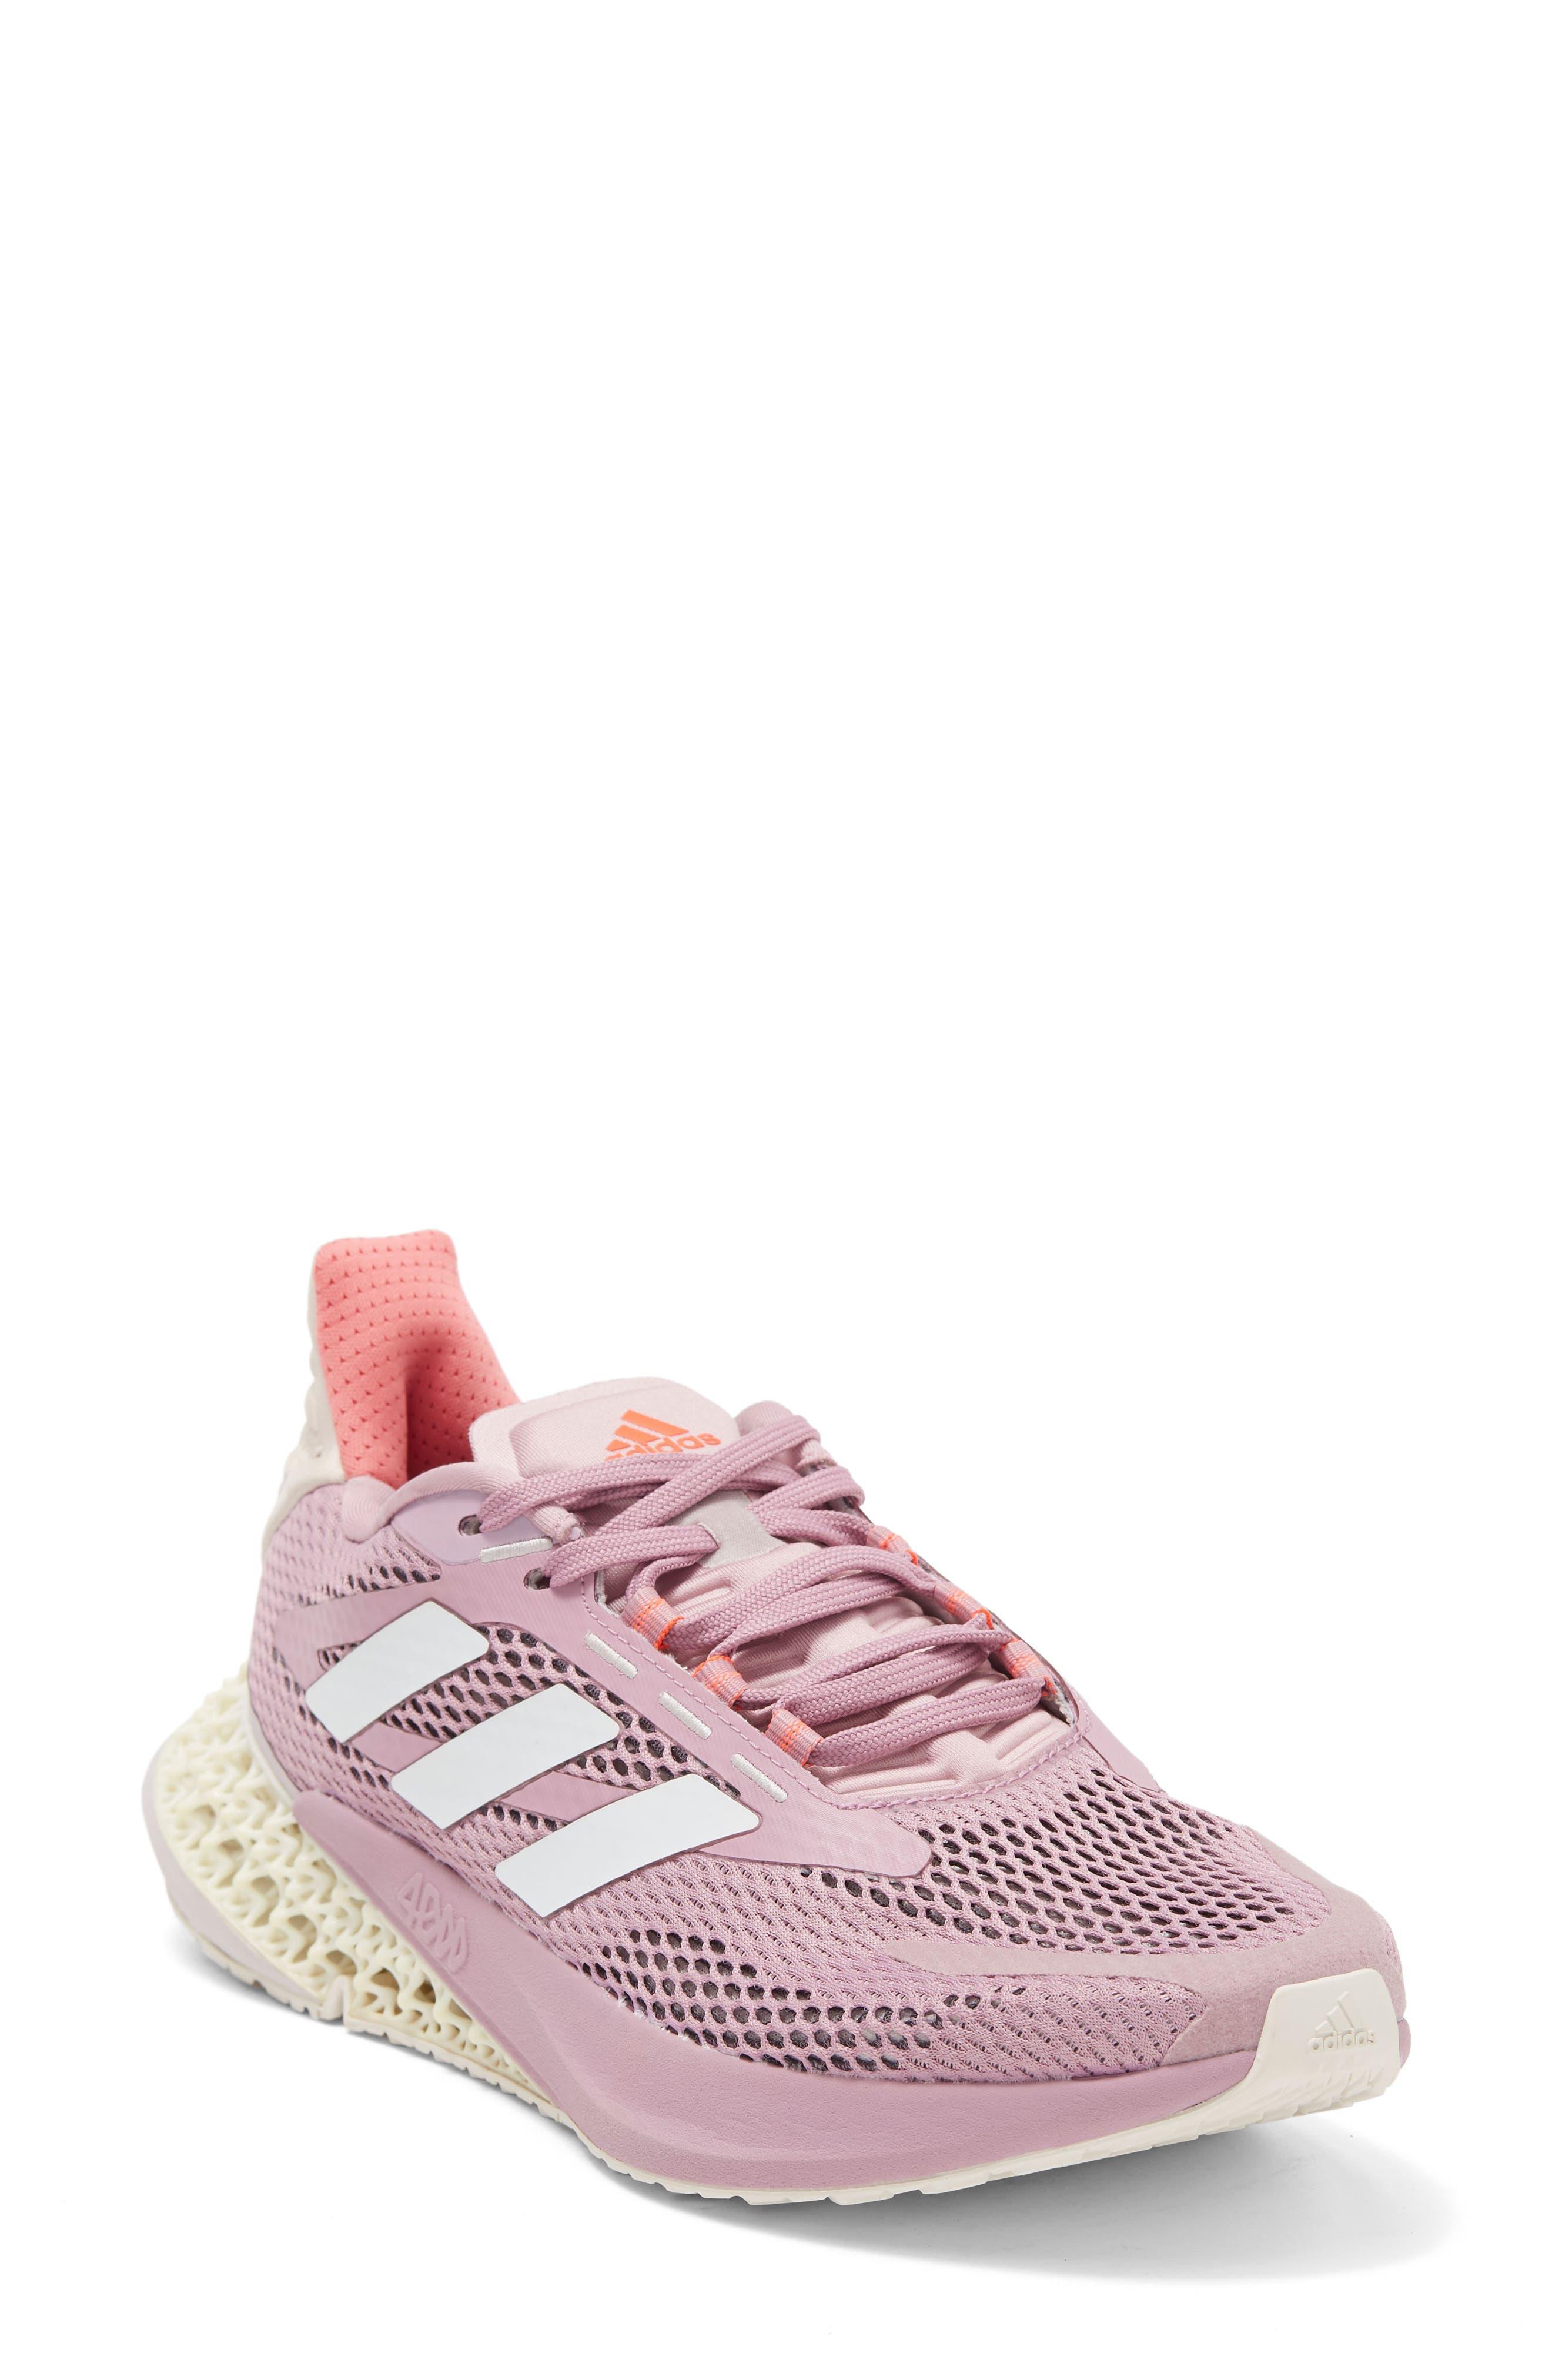 adidas Adistar Peachtree Road Race Sneaker In Shift Pink/ftwr White At  Nordstrom Rack | Lyst